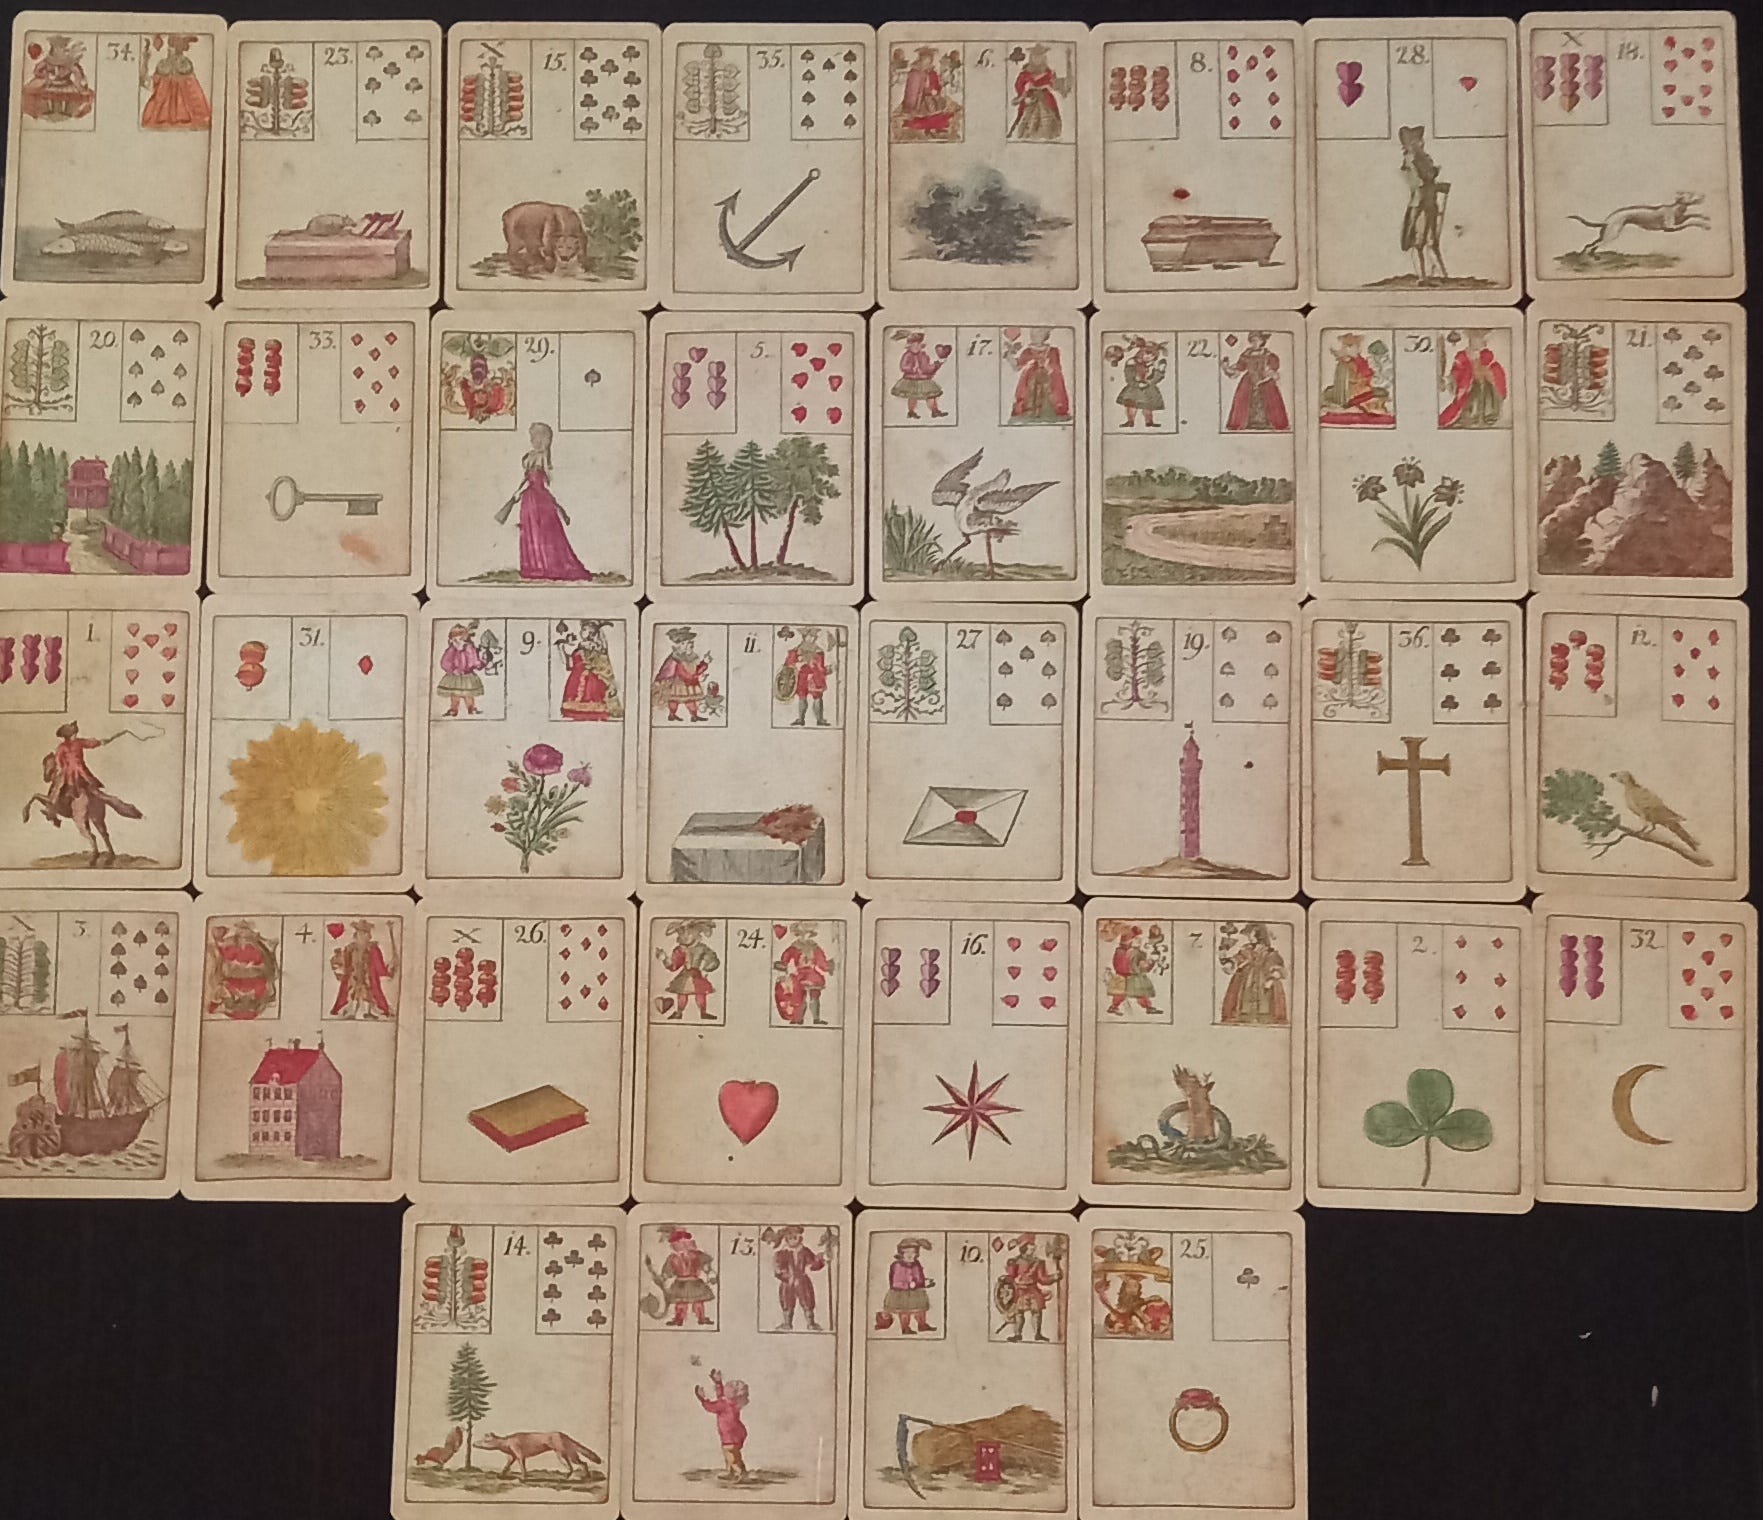 The Petit Lenormand Traditional Grand Tableau: A New Look at the